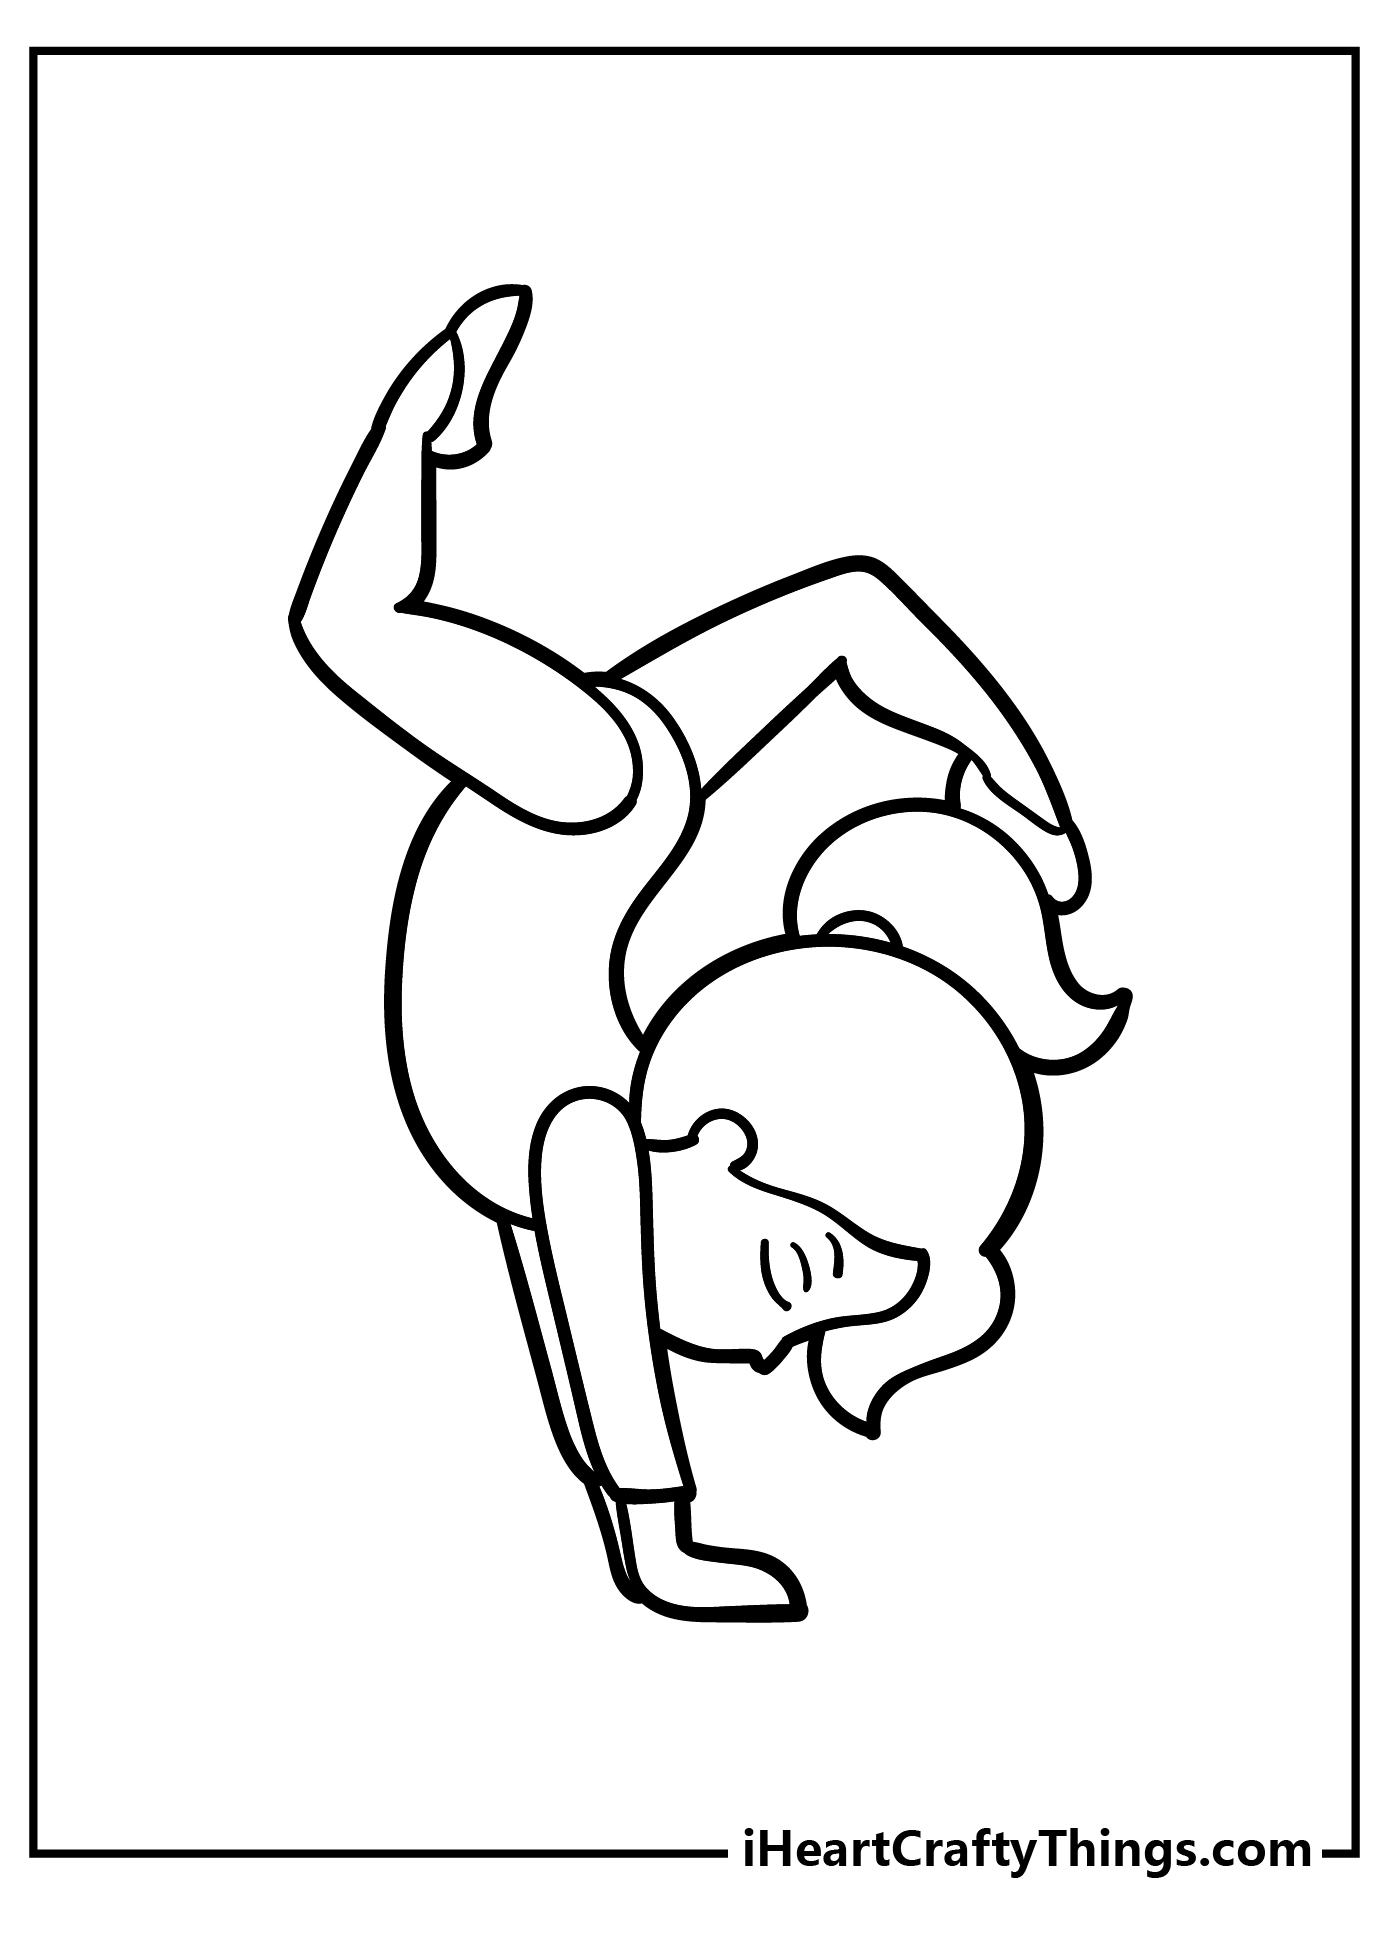 Gymnastics Coloring Pages for preschoolers free printable